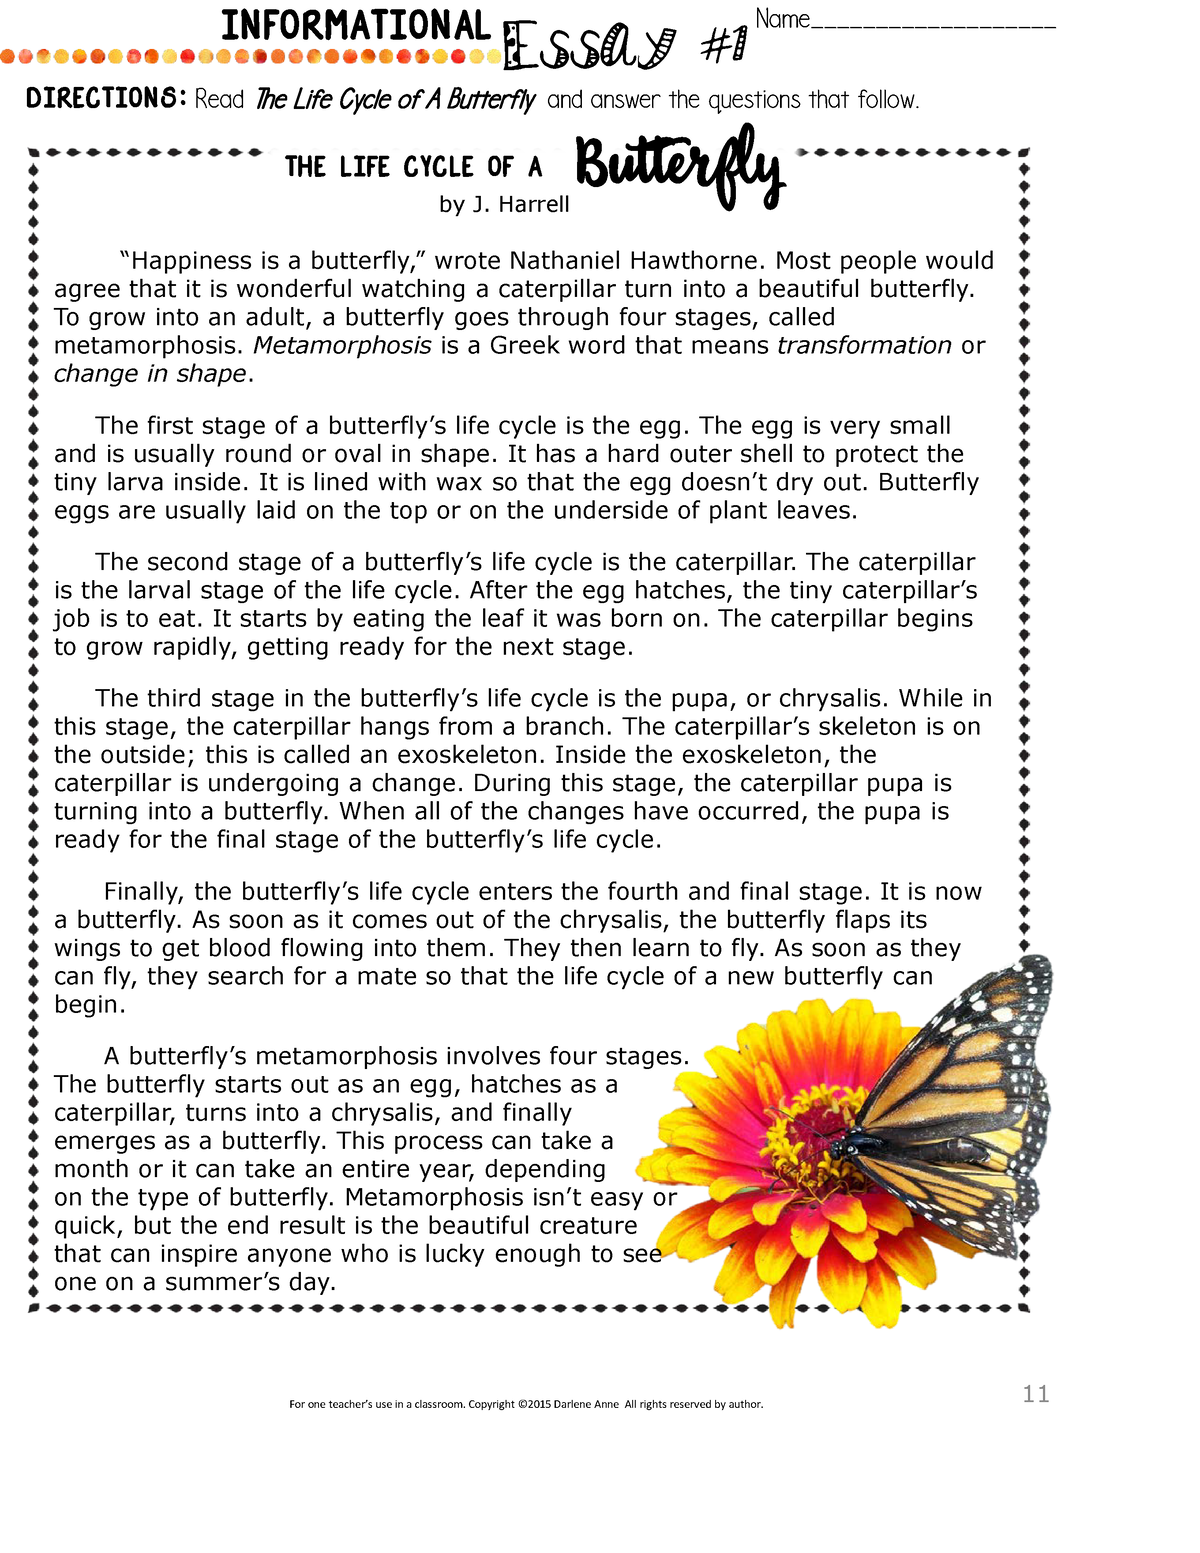 essay on butterfly life cycle